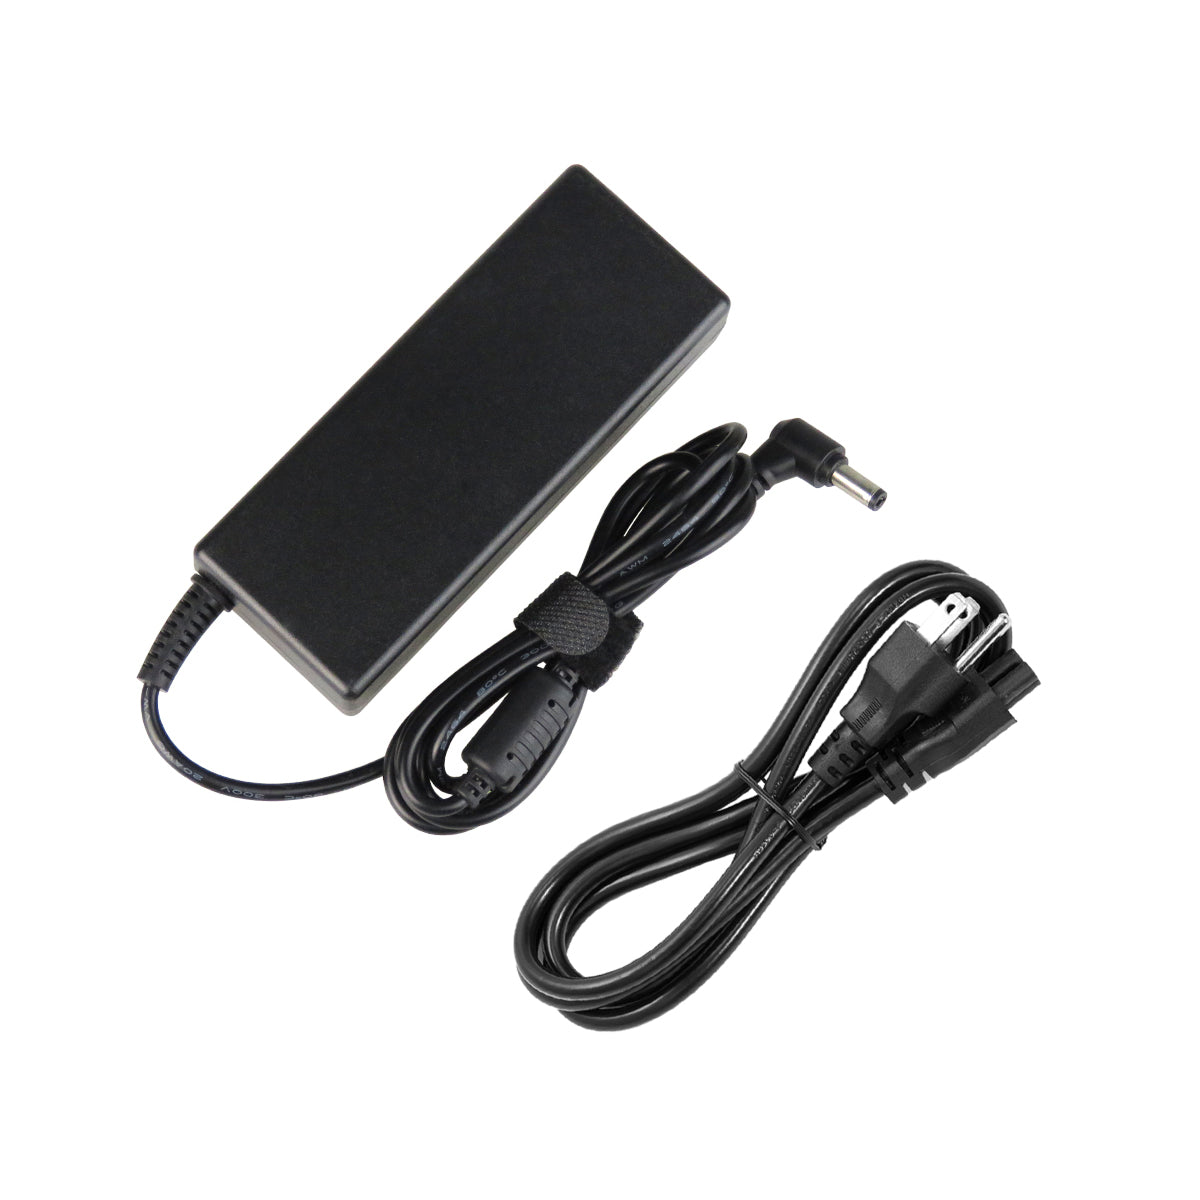 AC Adapter Charger for ASUS P53S Notebook.